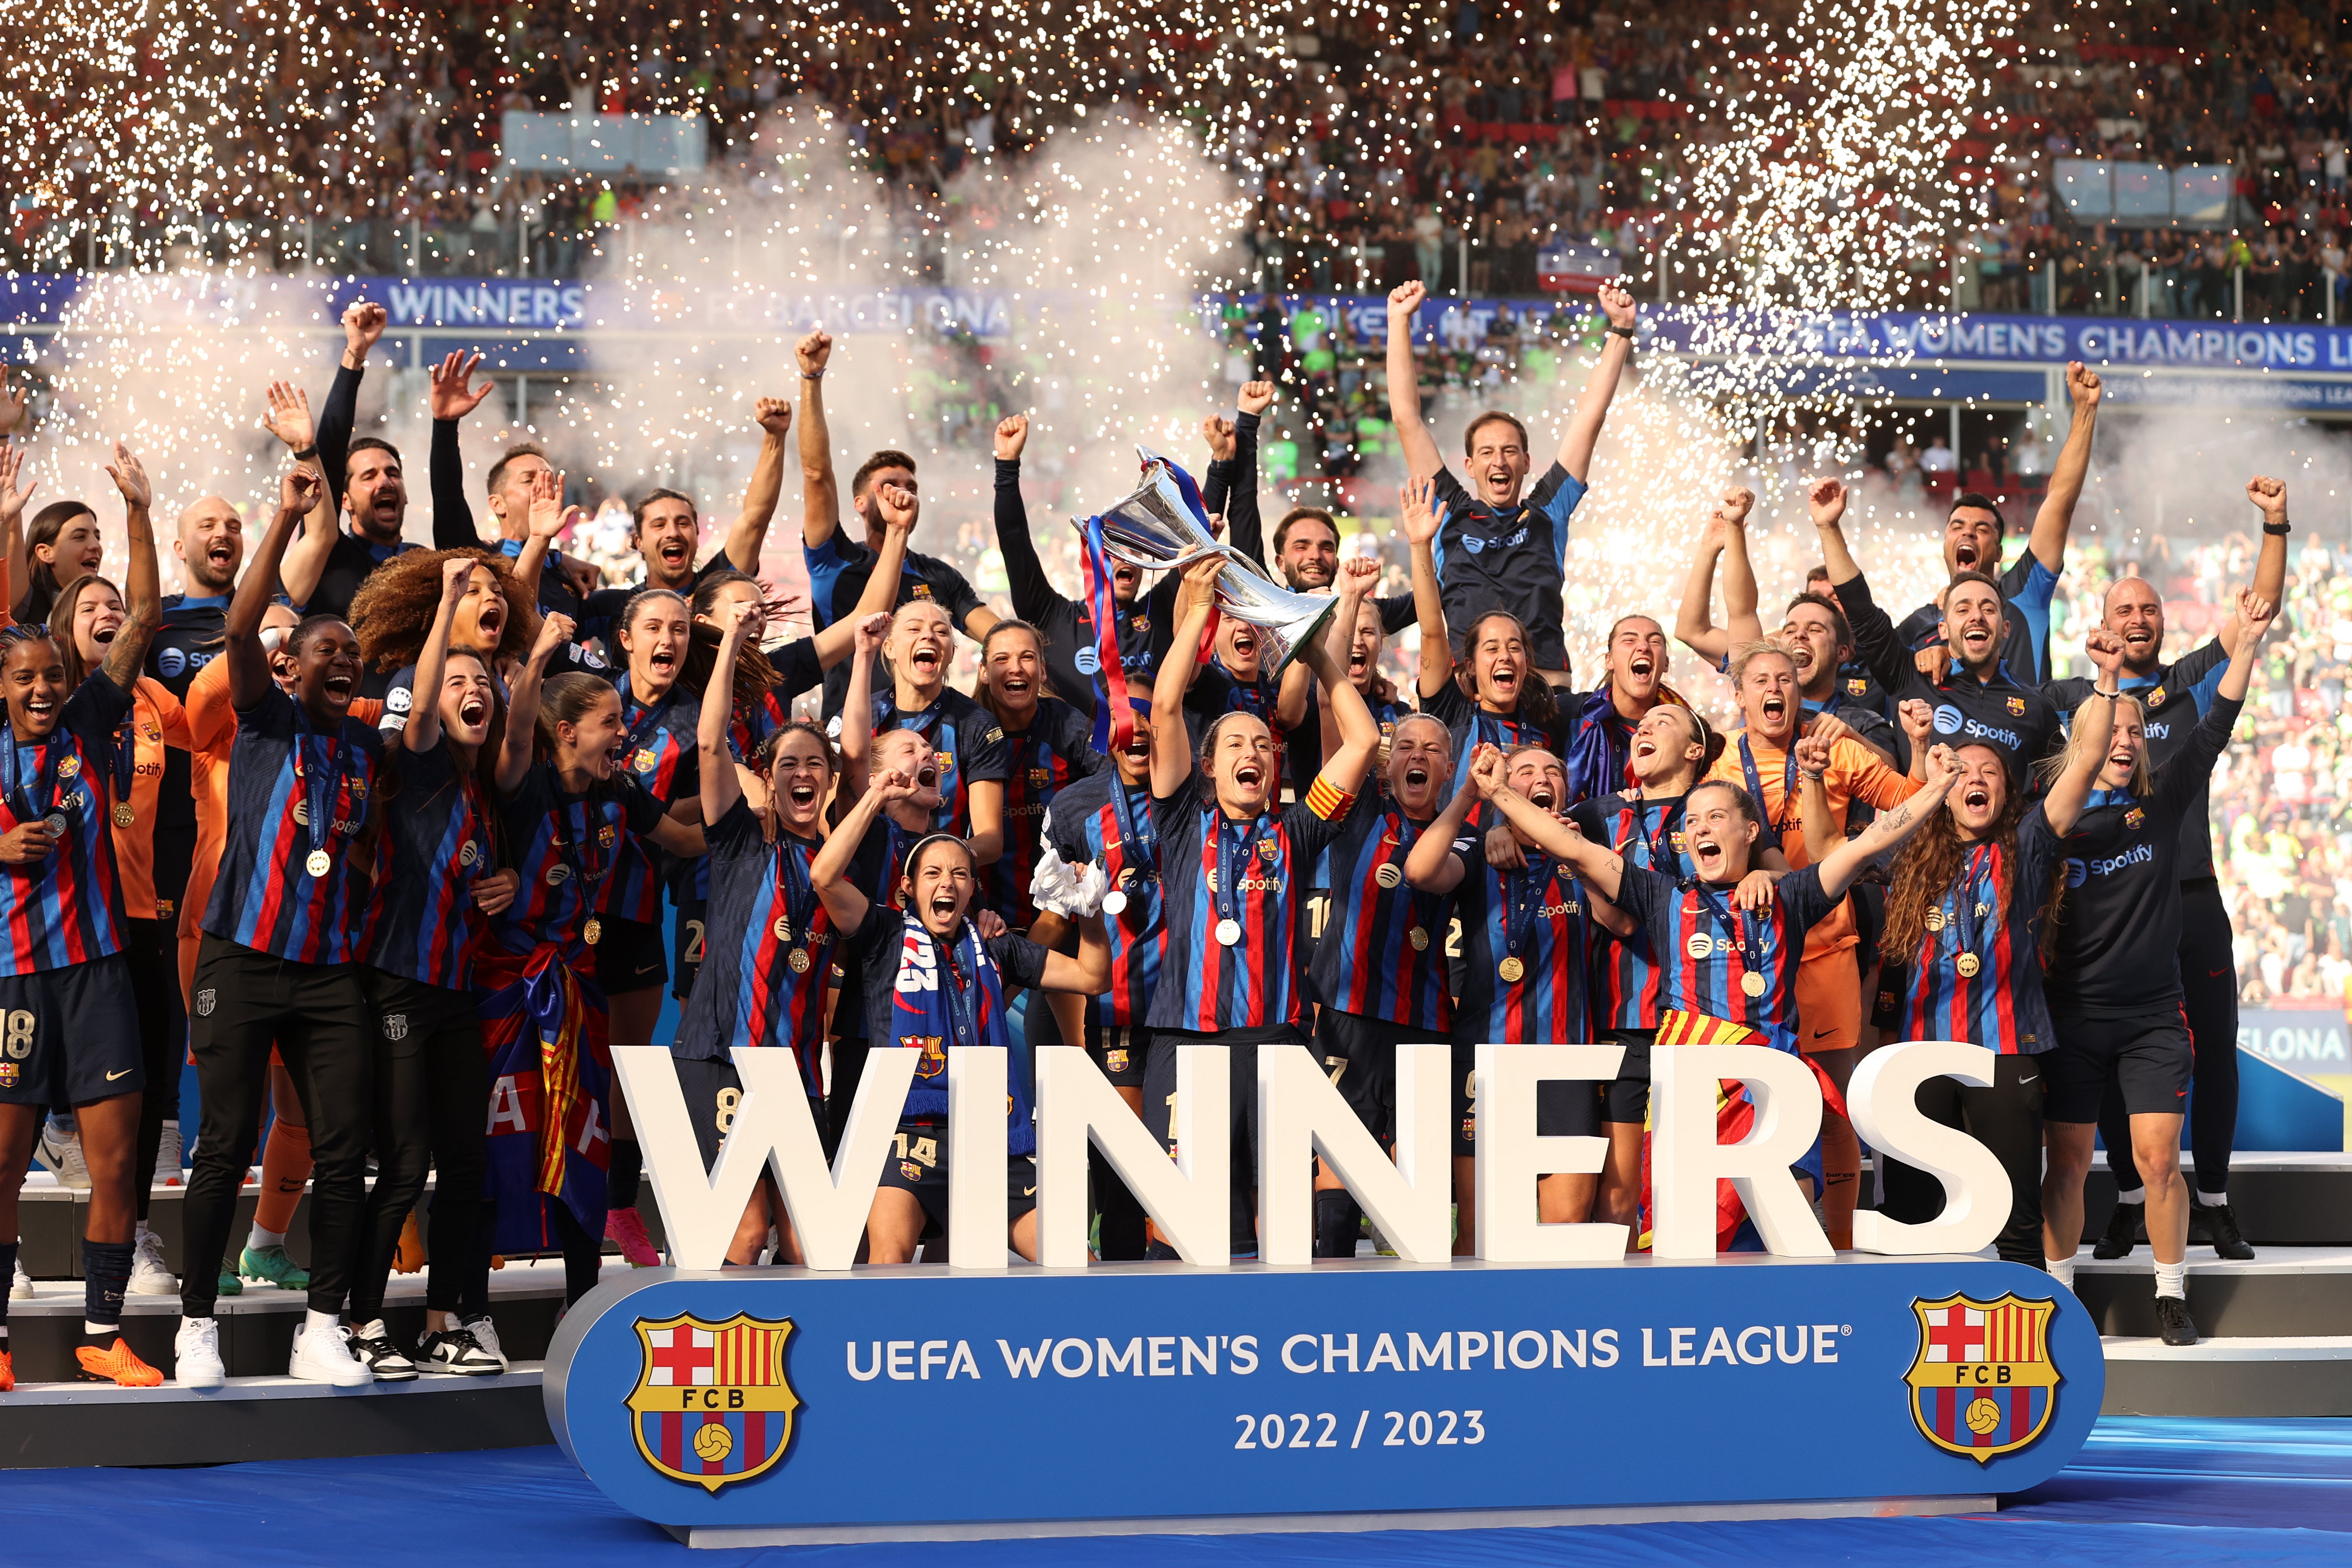 Barcelona won the Women’s Champions League for the second time in three seasons last year